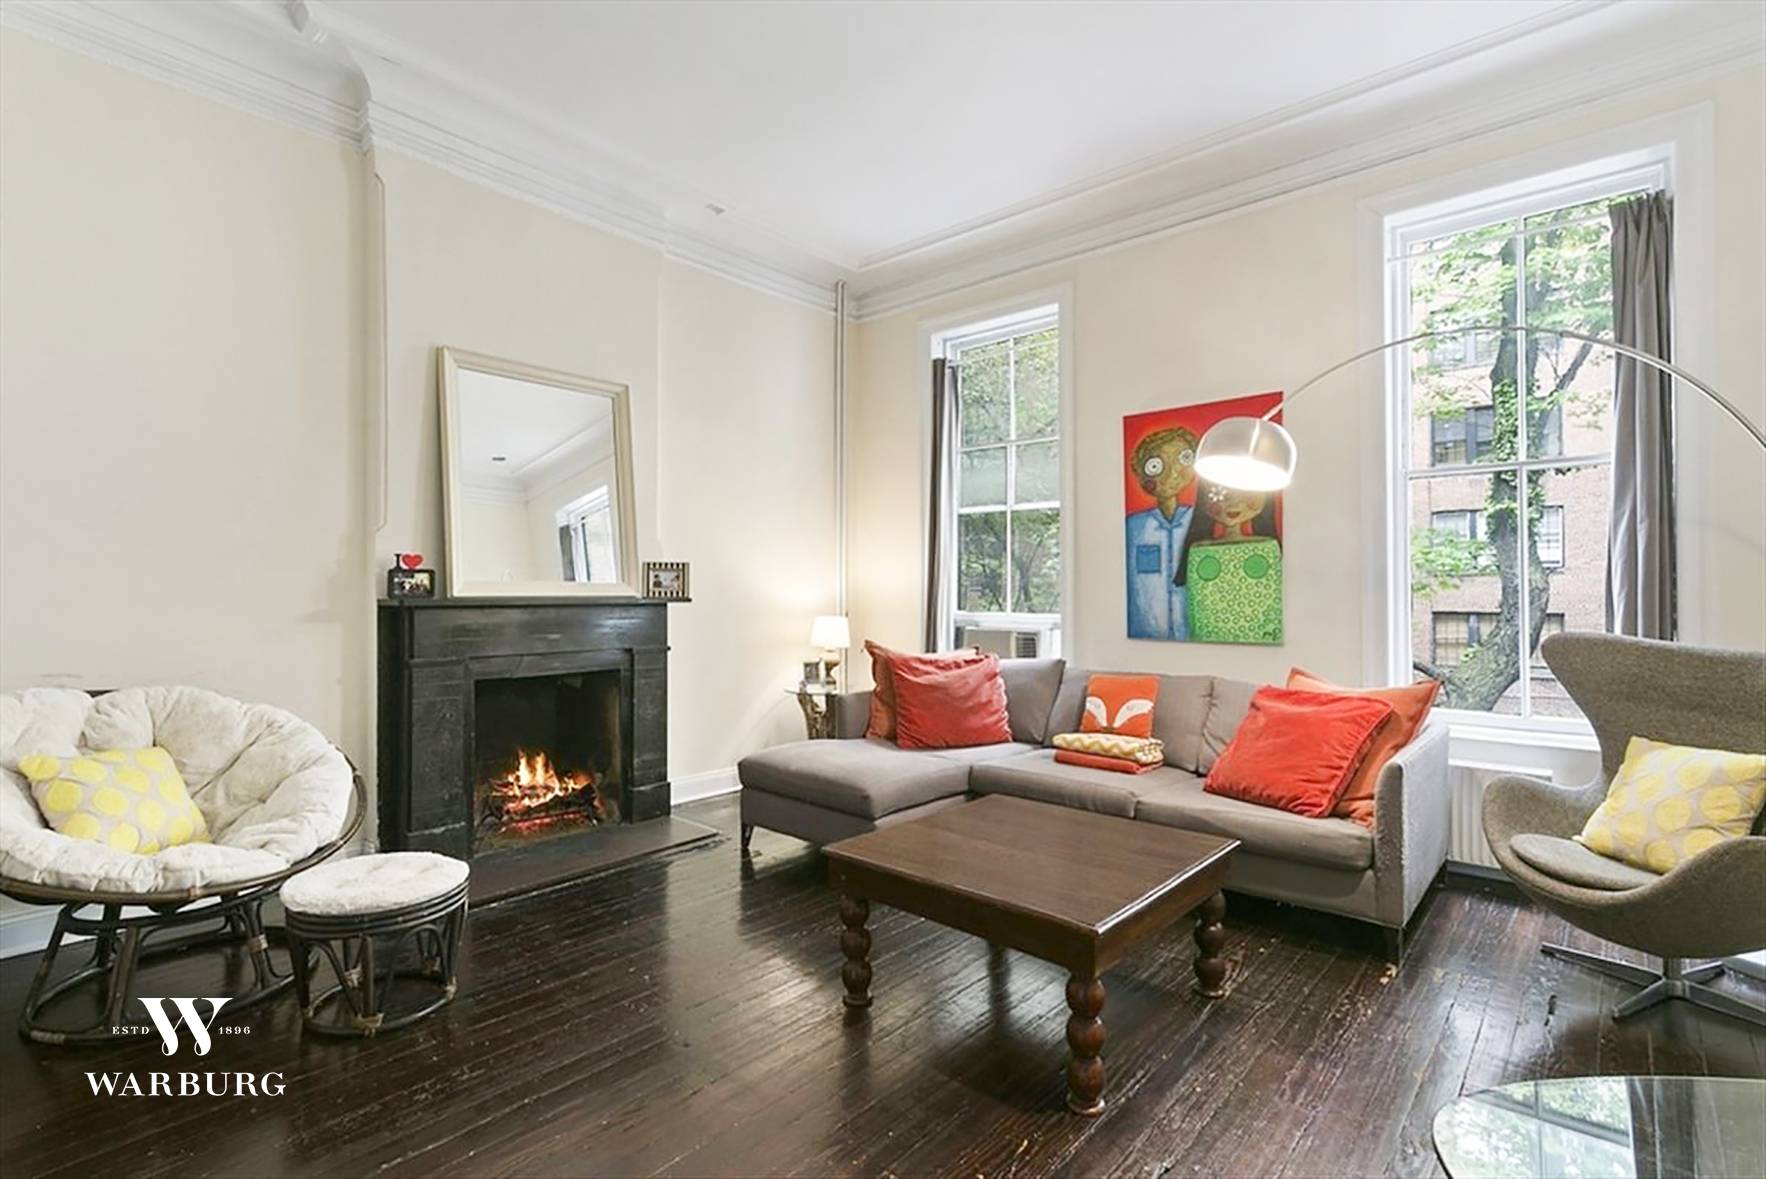 A delightful turn of the century row house approx 3, 000 SF 9 rooms, on a block lined with brownstones facing north with a southern facing garden garden and flagstone ...